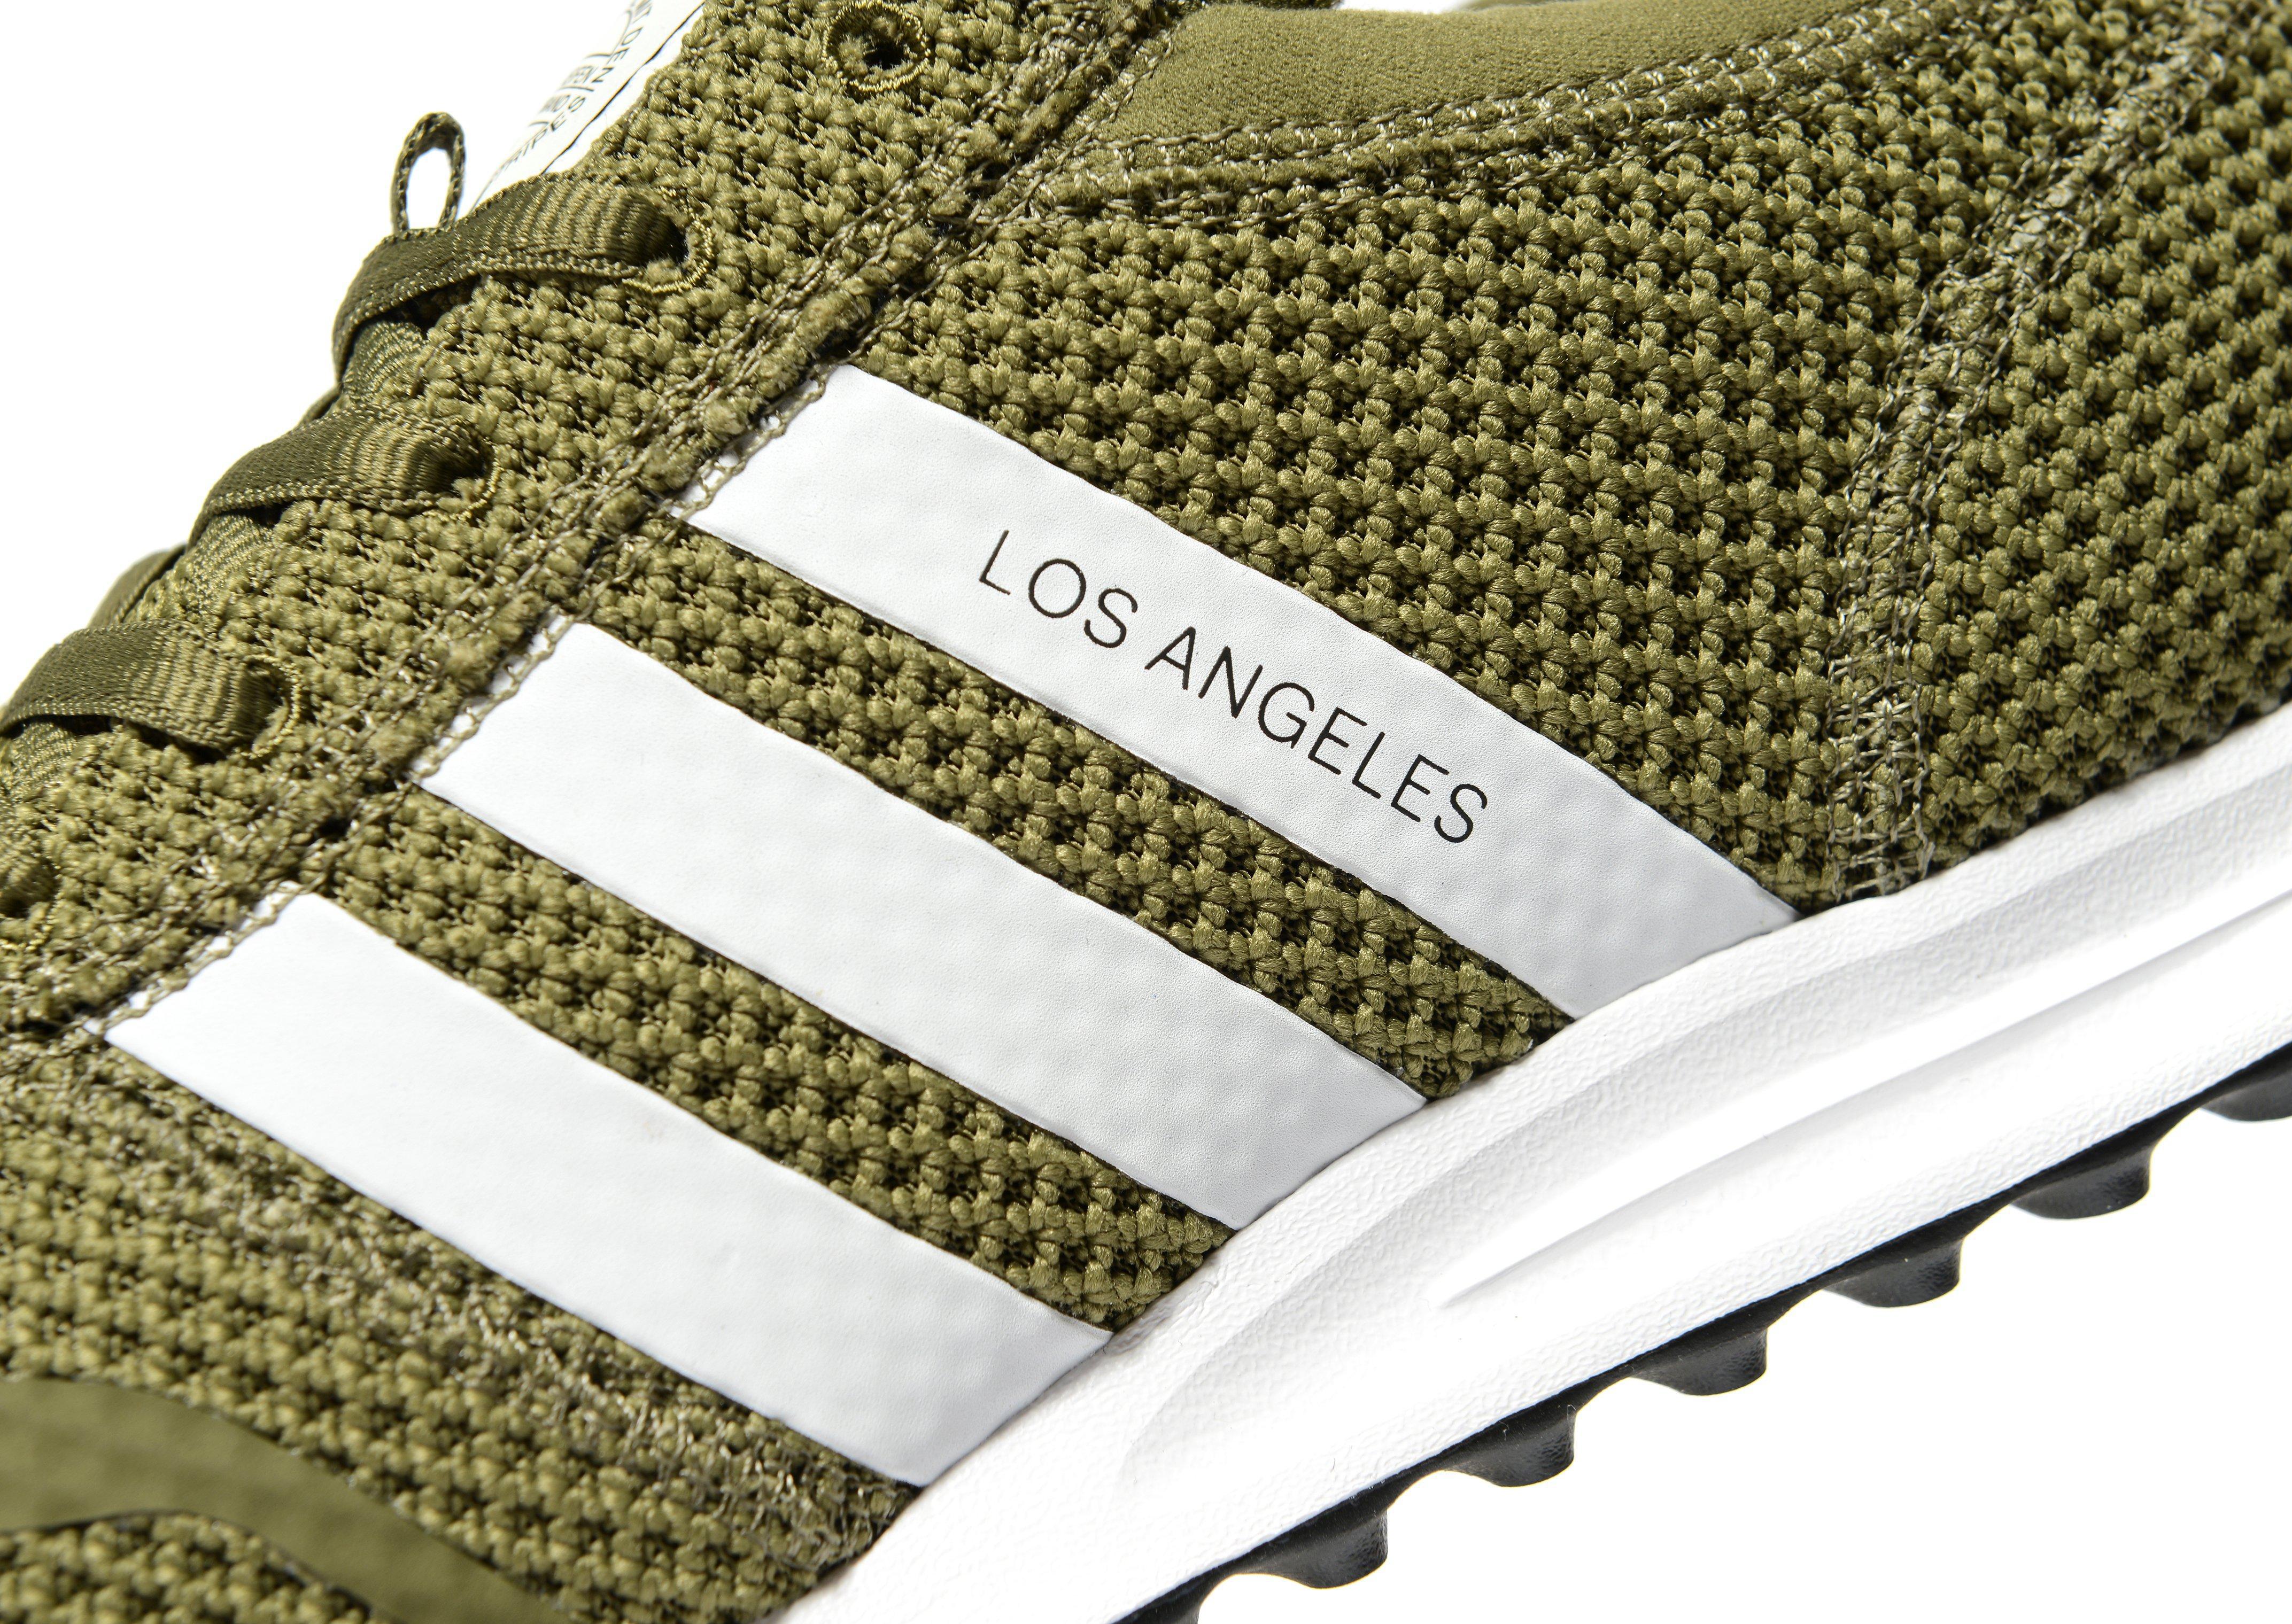 adidas Originals Rubber Los Angeles Ck in Olive/White (Green) for Men - Lyst